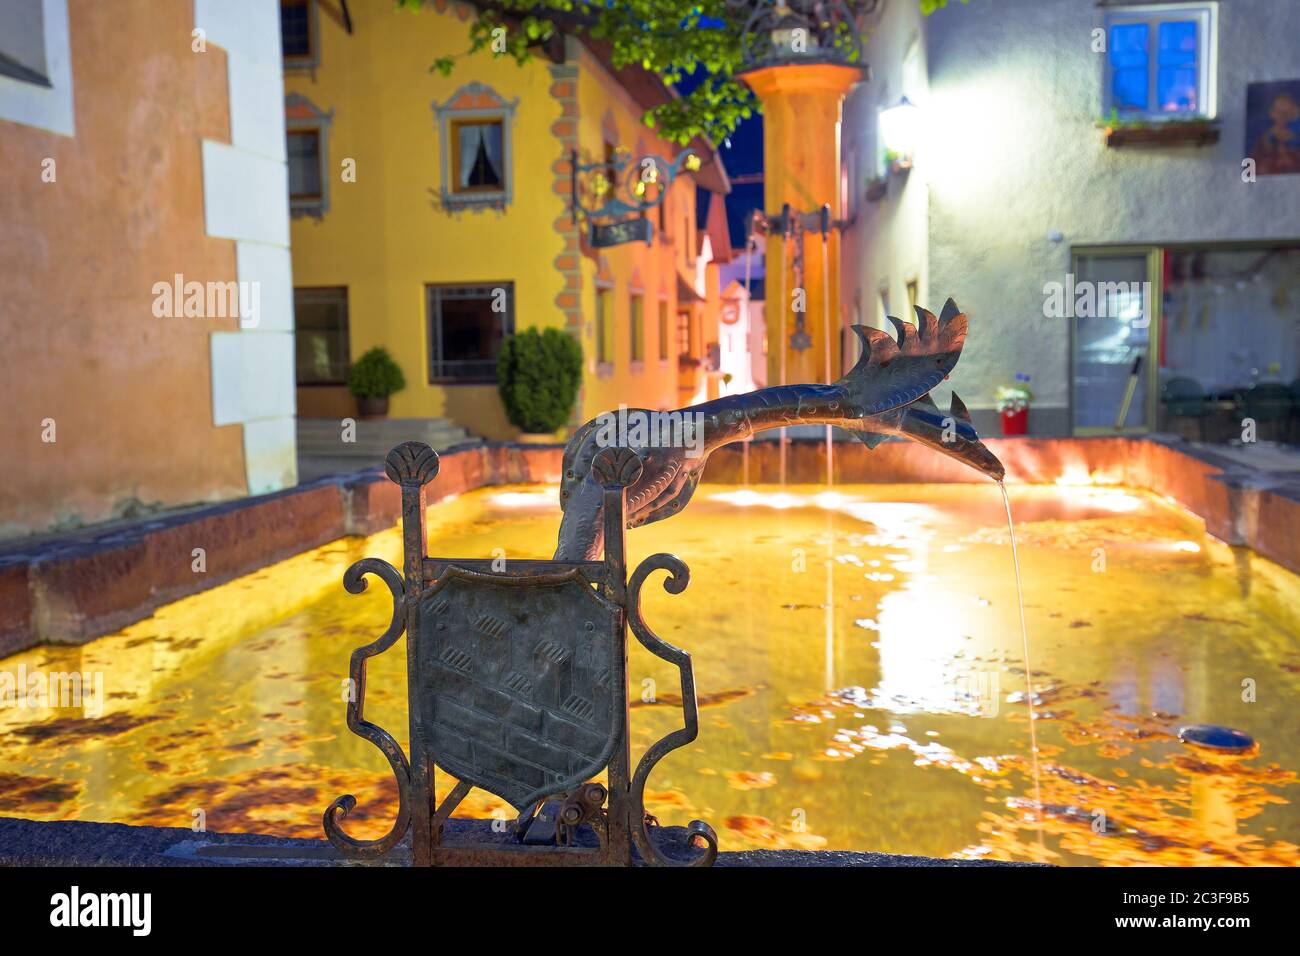 Town of Kastelruth or Castelrotto fountain and street evening view Stock Photo